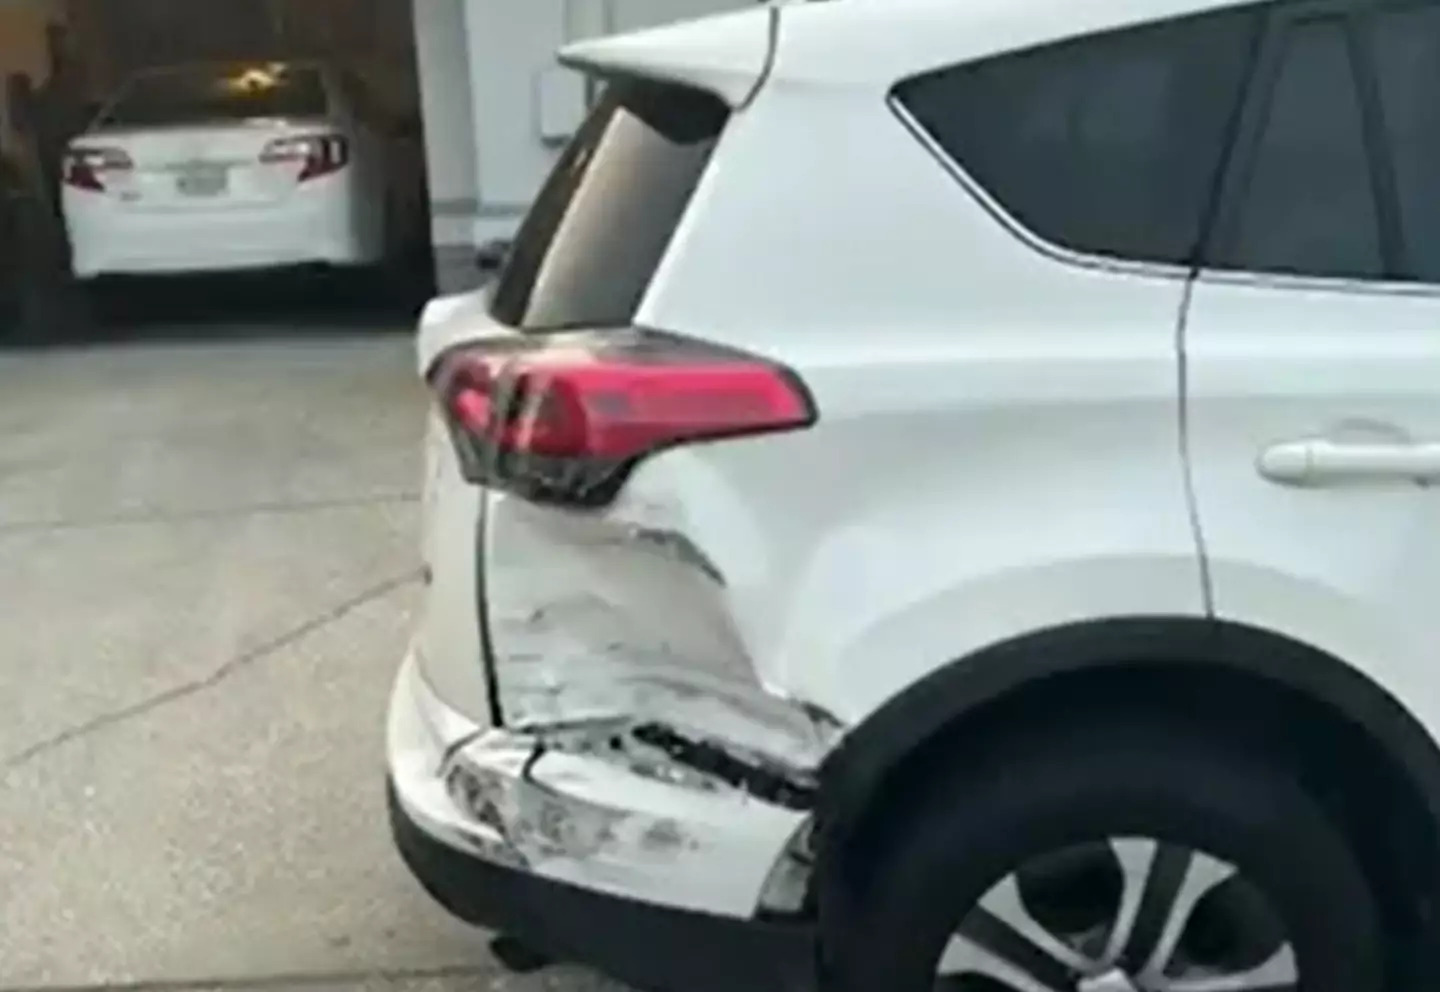 The Florida woman had only just paid off her car before it was crashed into.